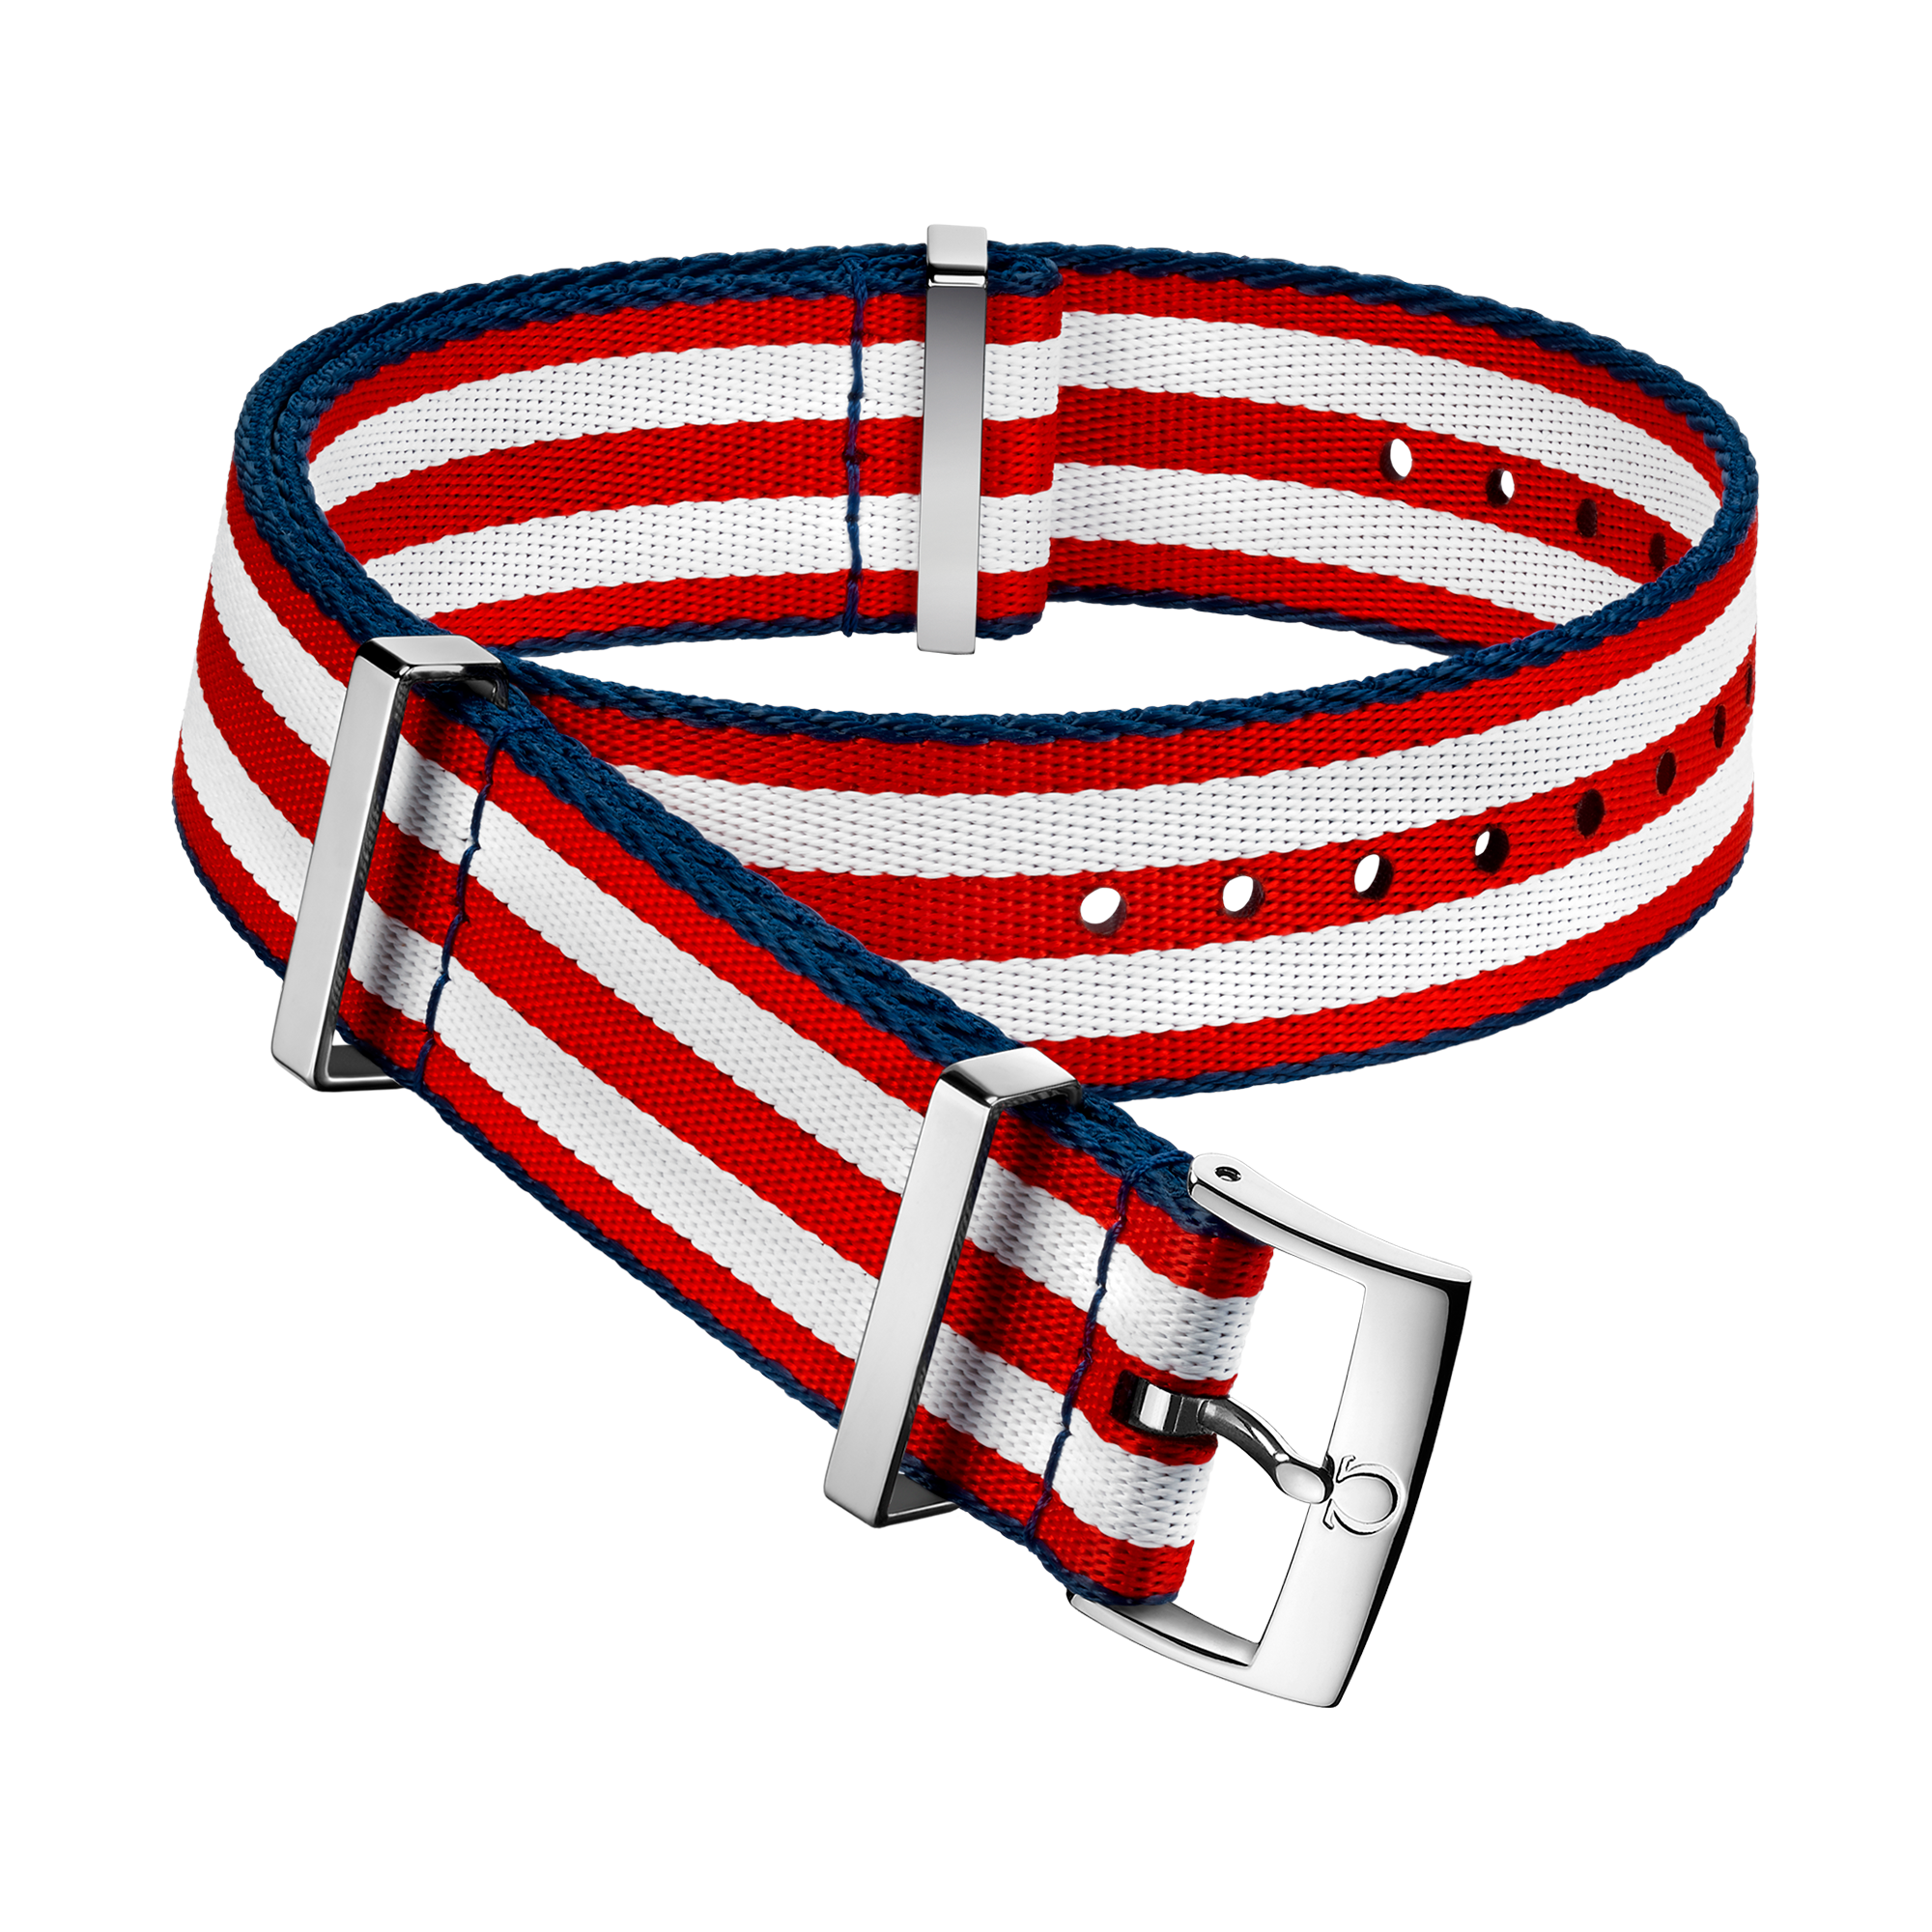 NATO strap - Polyamide 5-stripe red and white strap with blue borders - 031CWZ010616w